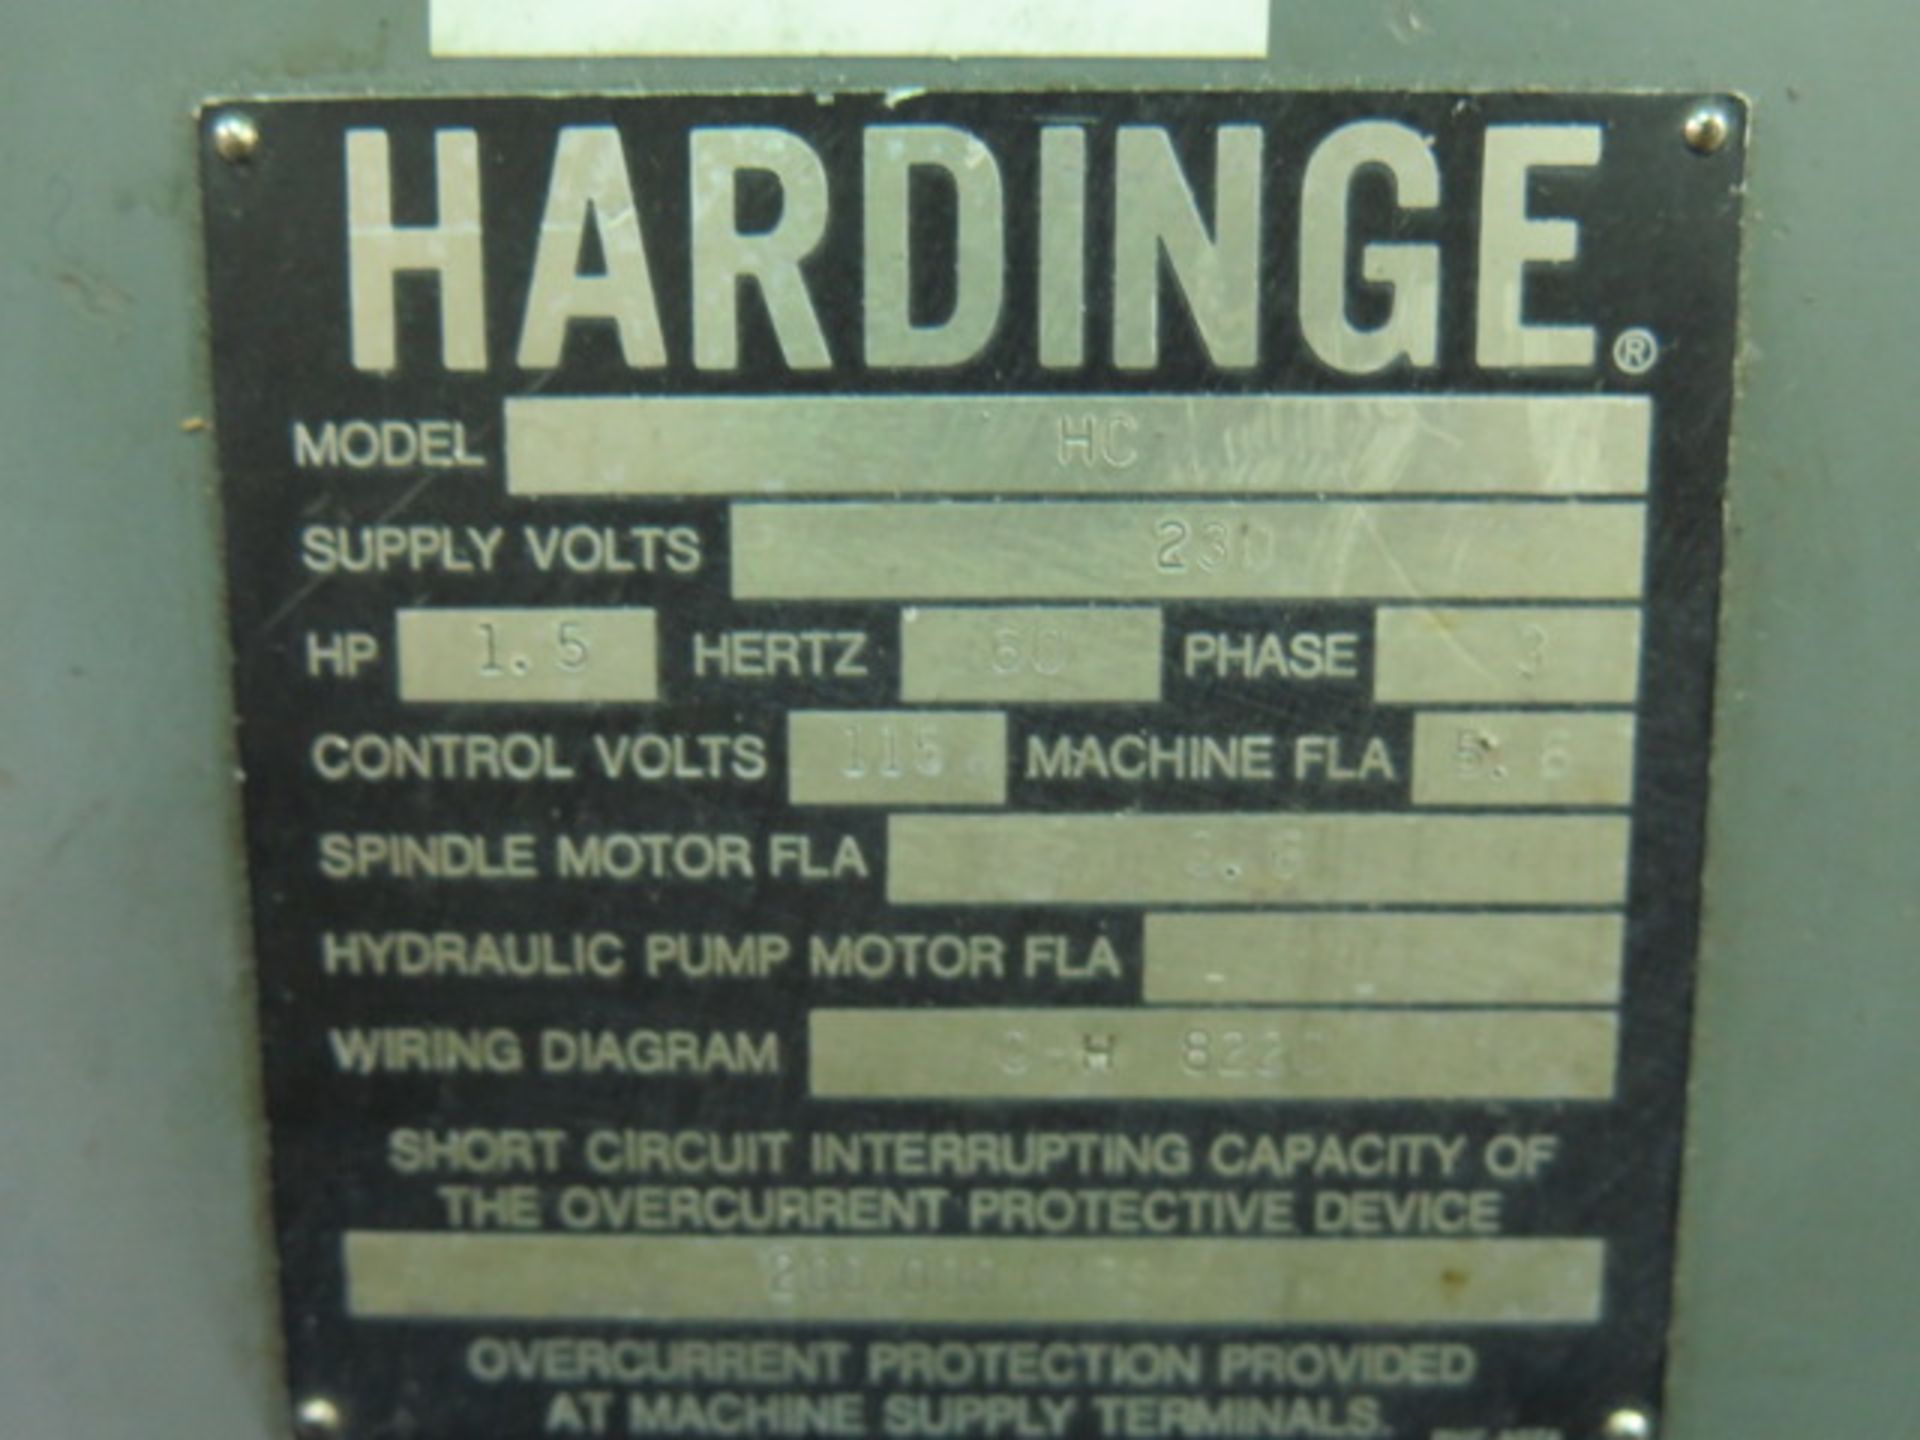 Hardinge HC Hand Chucker s/n HC-6914-T w/ Threading Attachment, Chasers and Followers, 125-3000 RPM, - Image 13 of 13